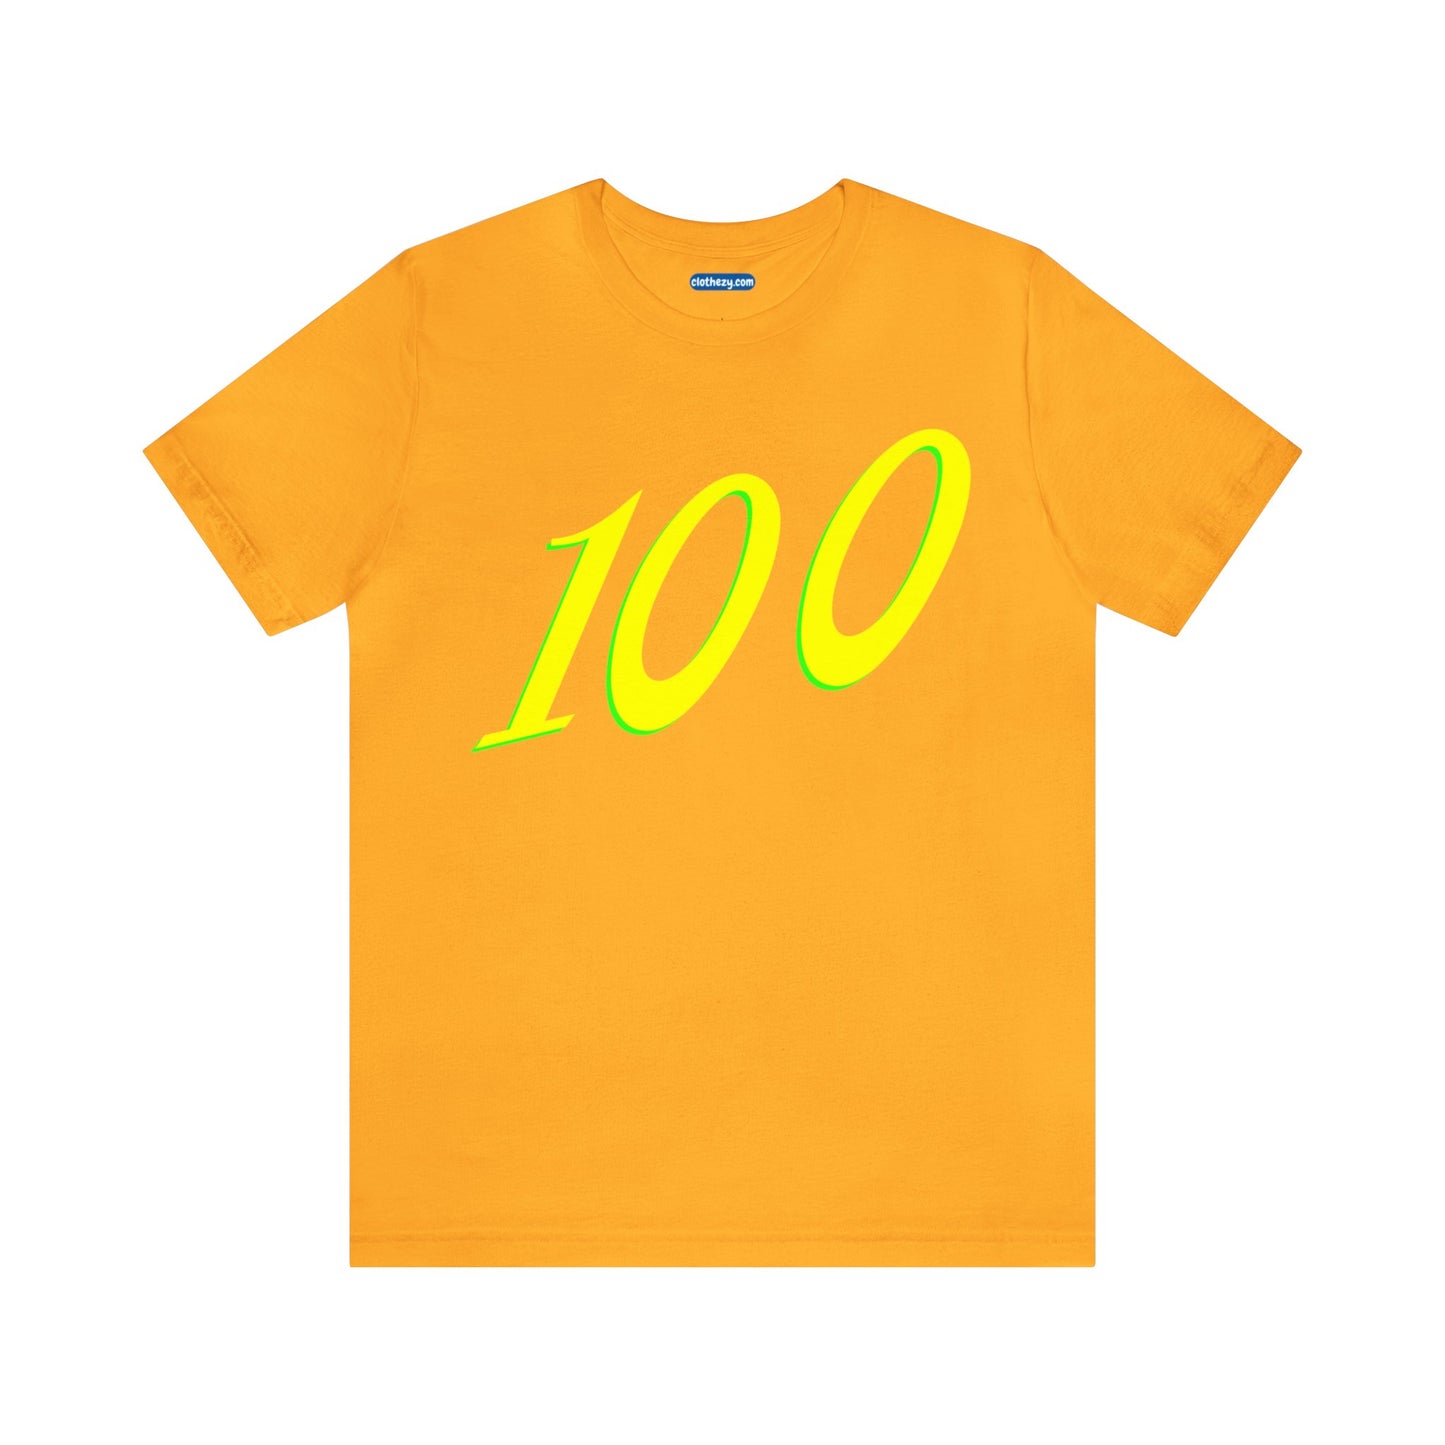 Number 100 Design - Soft Cotton Tee for birthdays and celebrations, Gift for friends and family, Multiple Options by clothezy.com in Gold Size Small - Buy Now